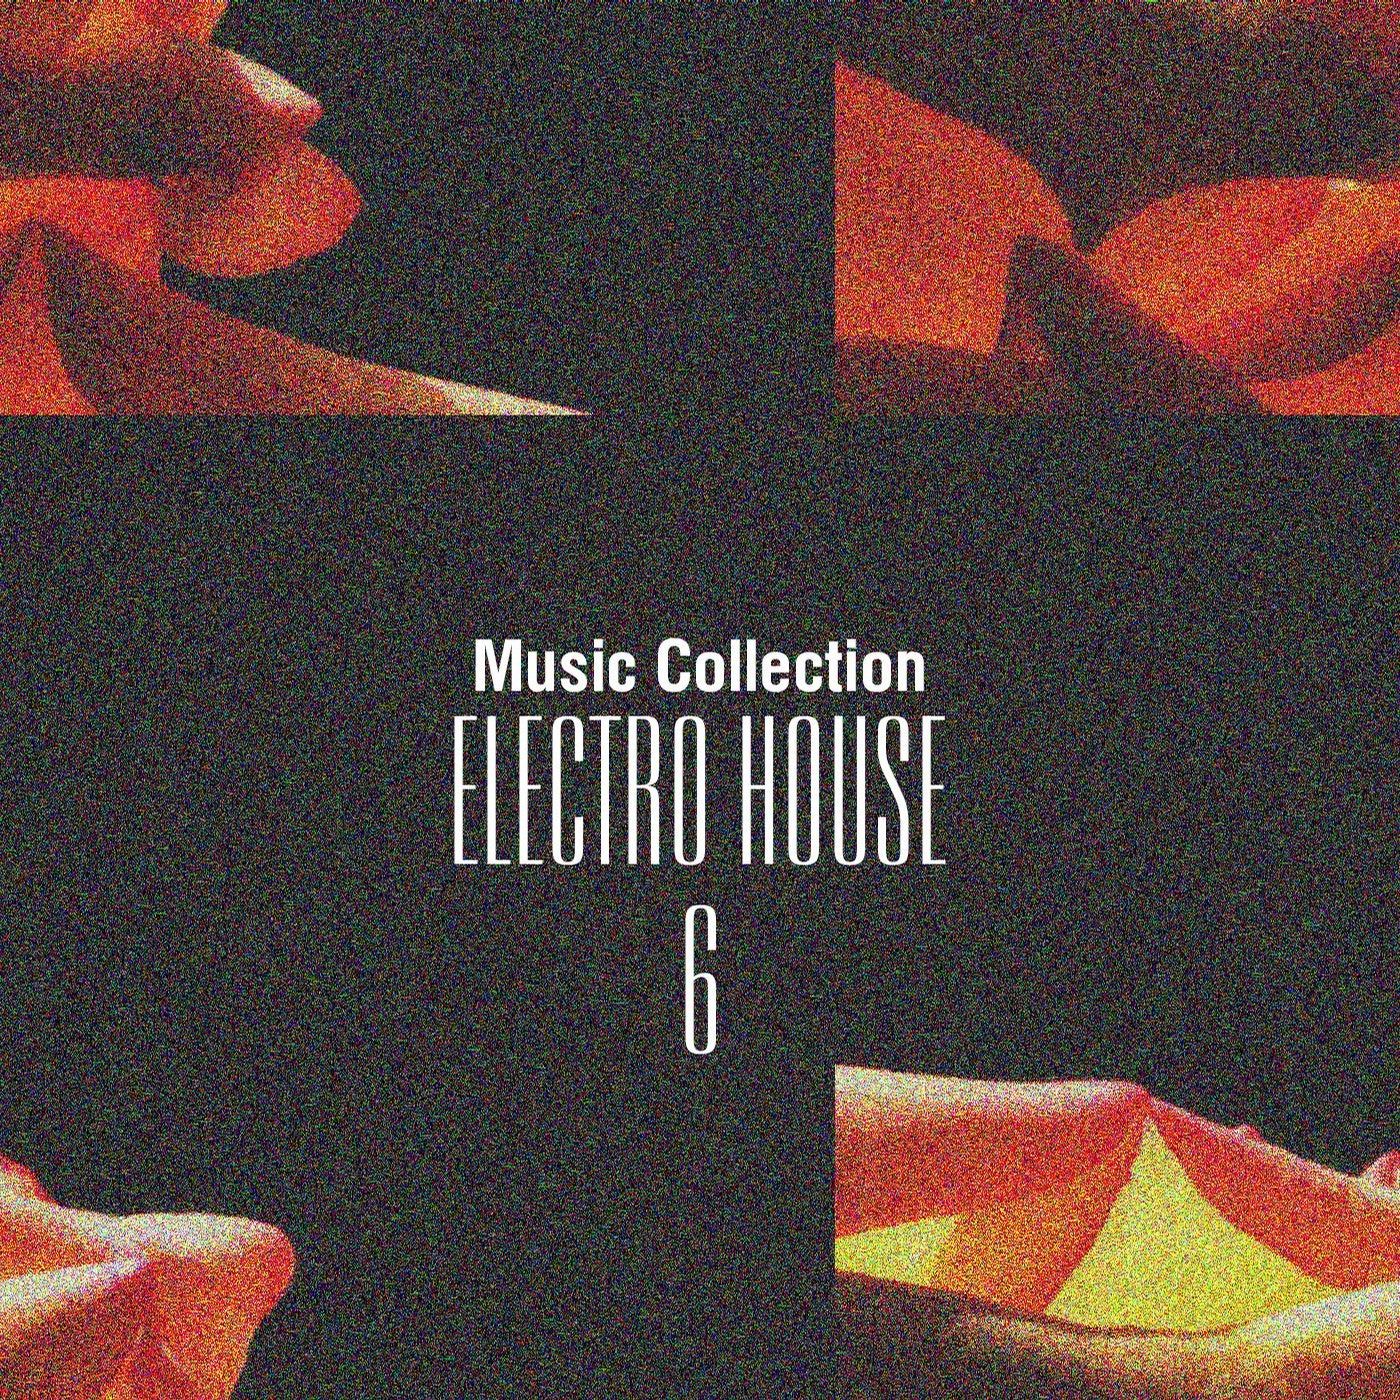 Music Collection. Electro House, Vol. 6